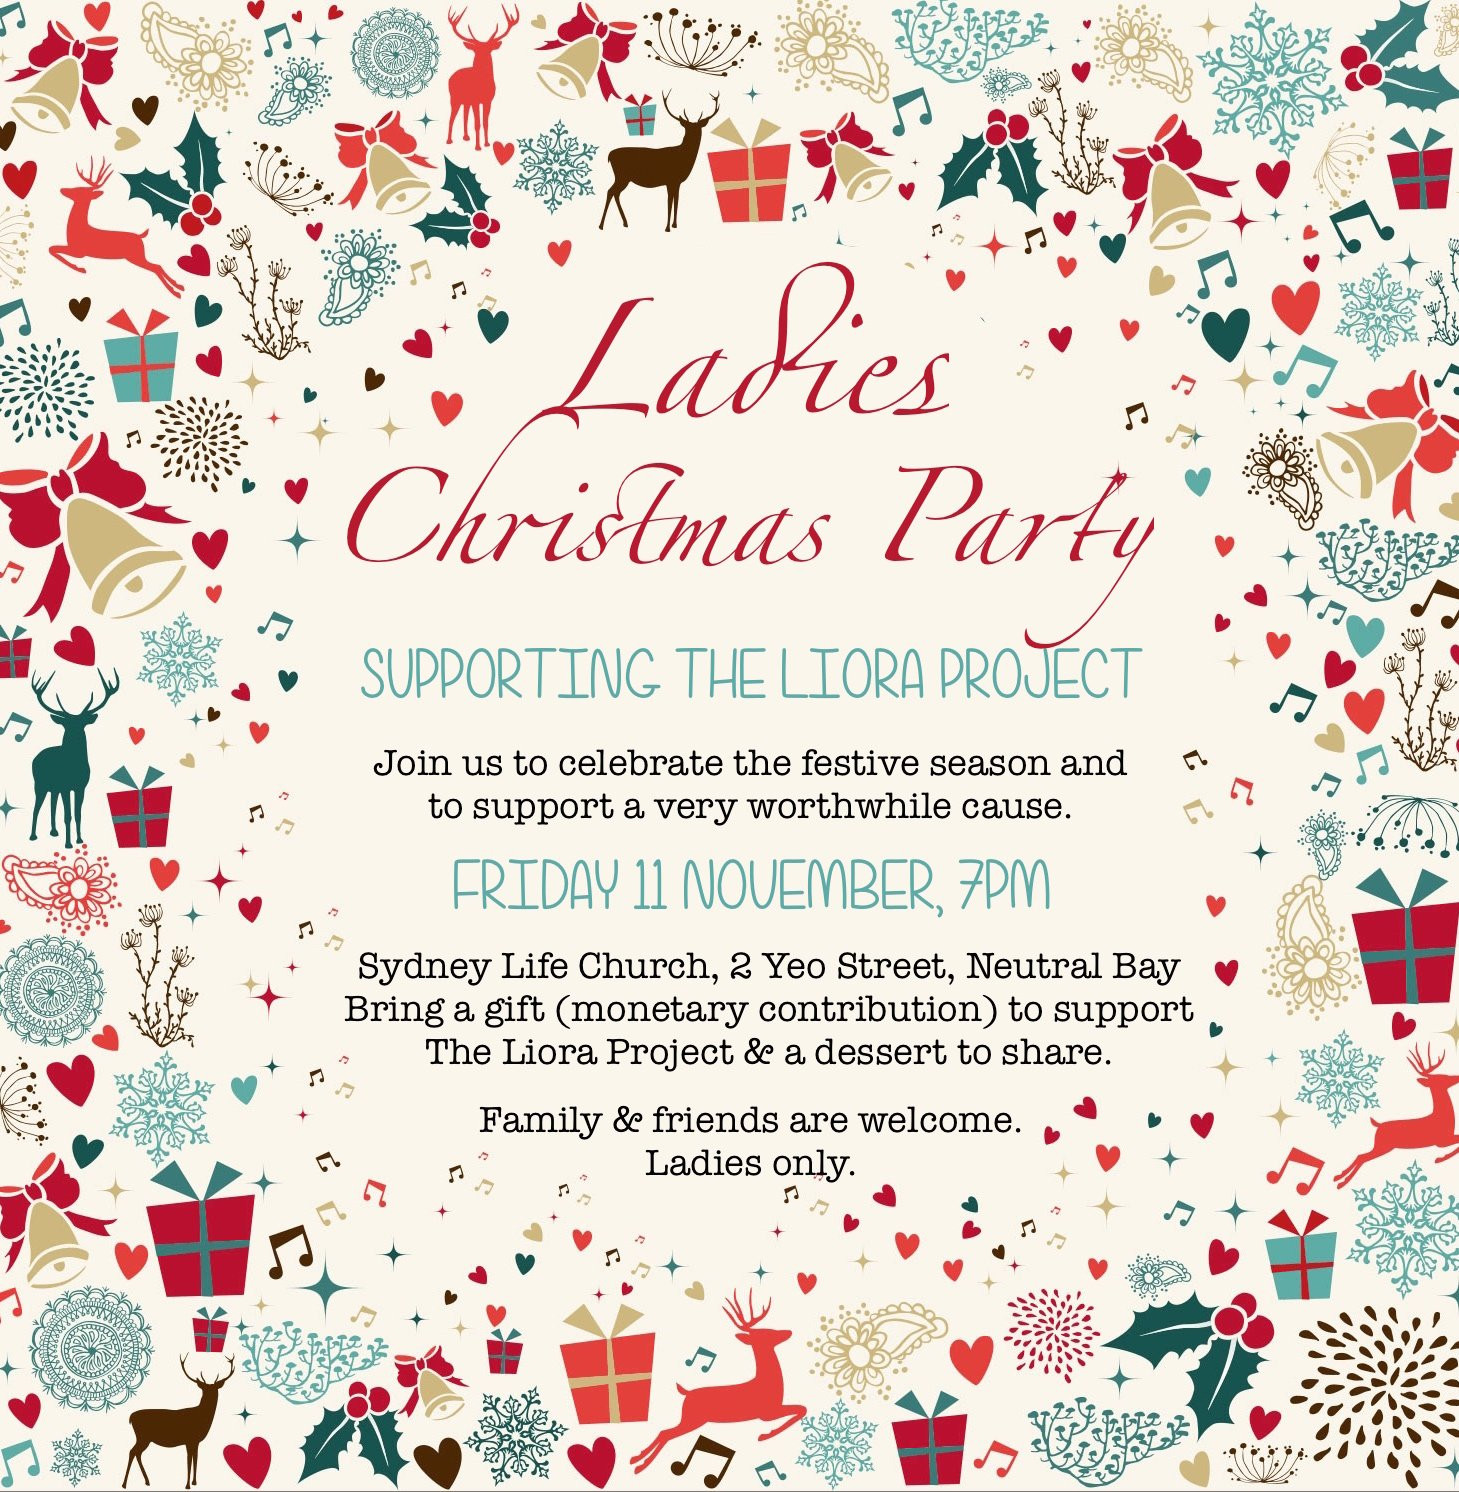 Ladies Christmas Party Ideas
 LADIES CHRISTMAS PARTY Sydney Life Church